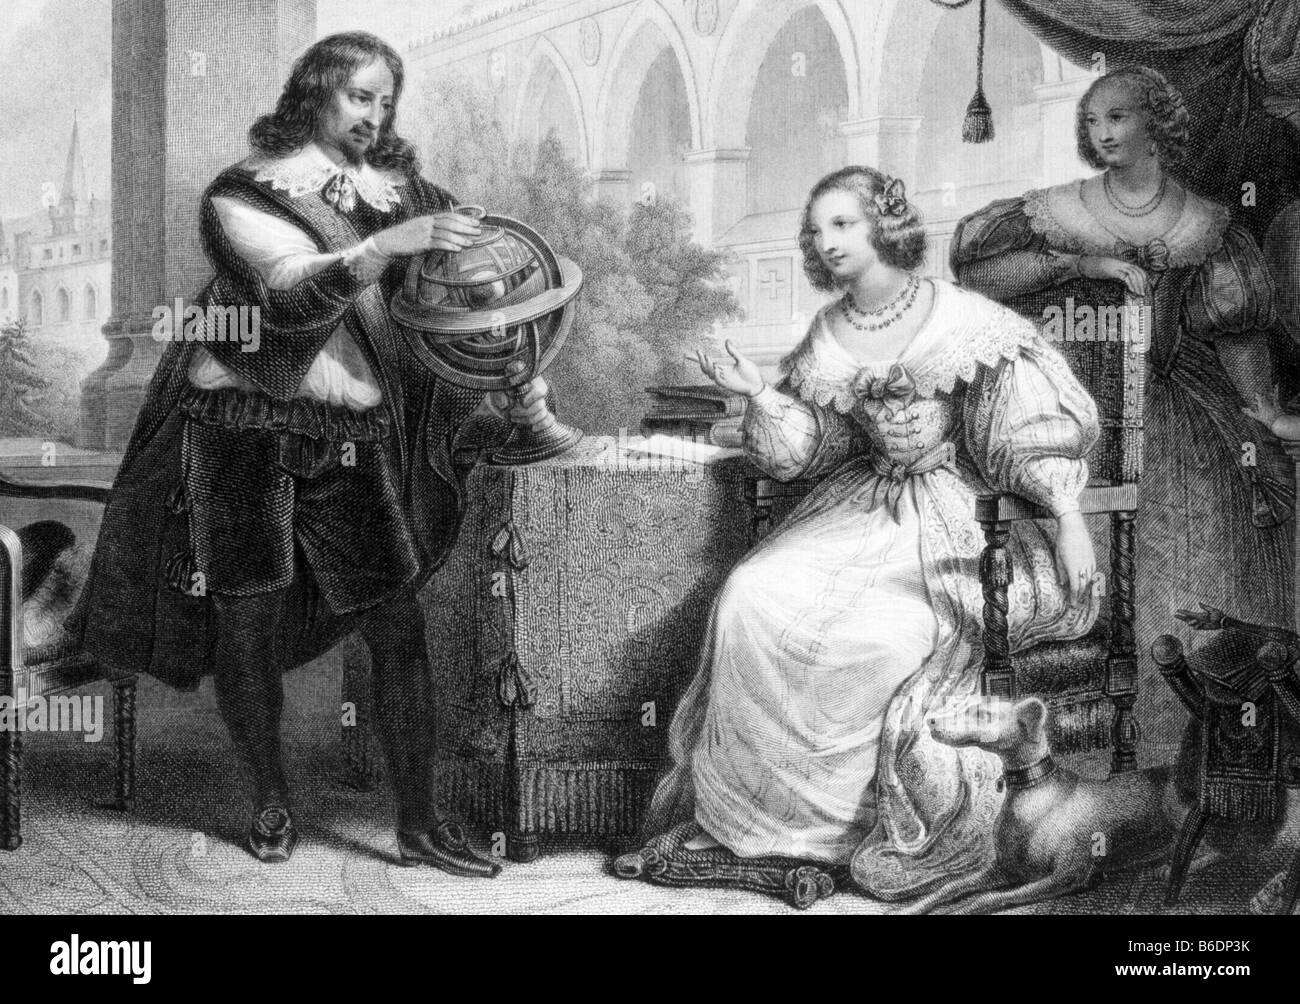 QUEEN CHRISTINA OF SWEDEN displays her interest in Science in this 18th century engraving Stock Photo